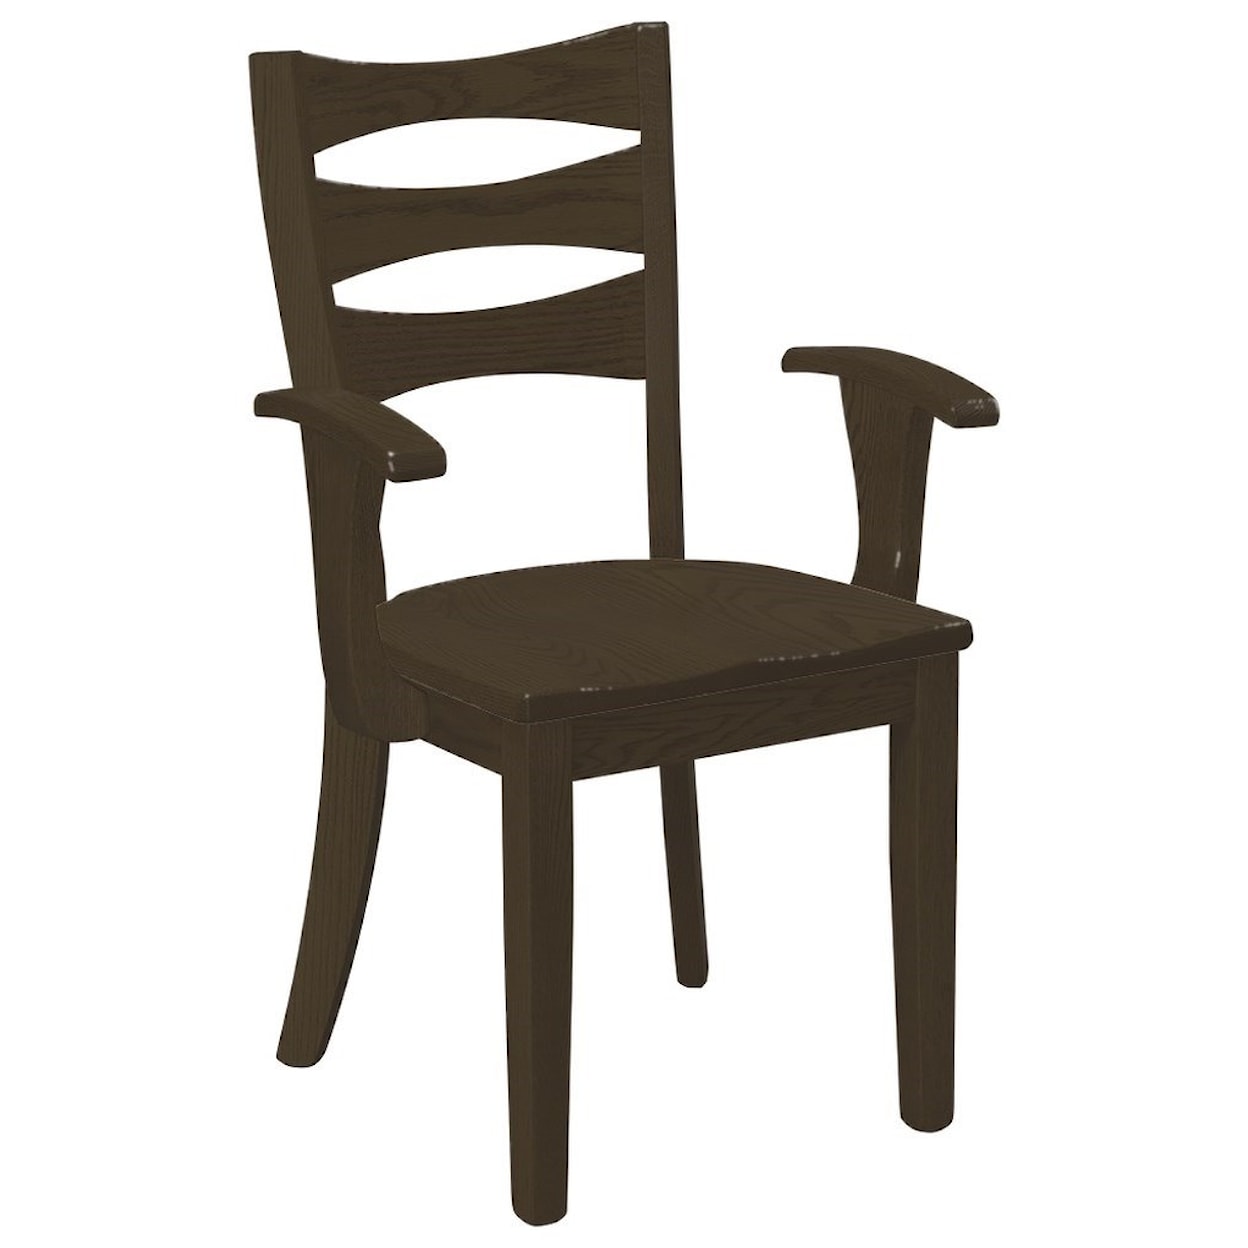 Daniel's Amish Chairs and Barstools Sierra Arm Chair